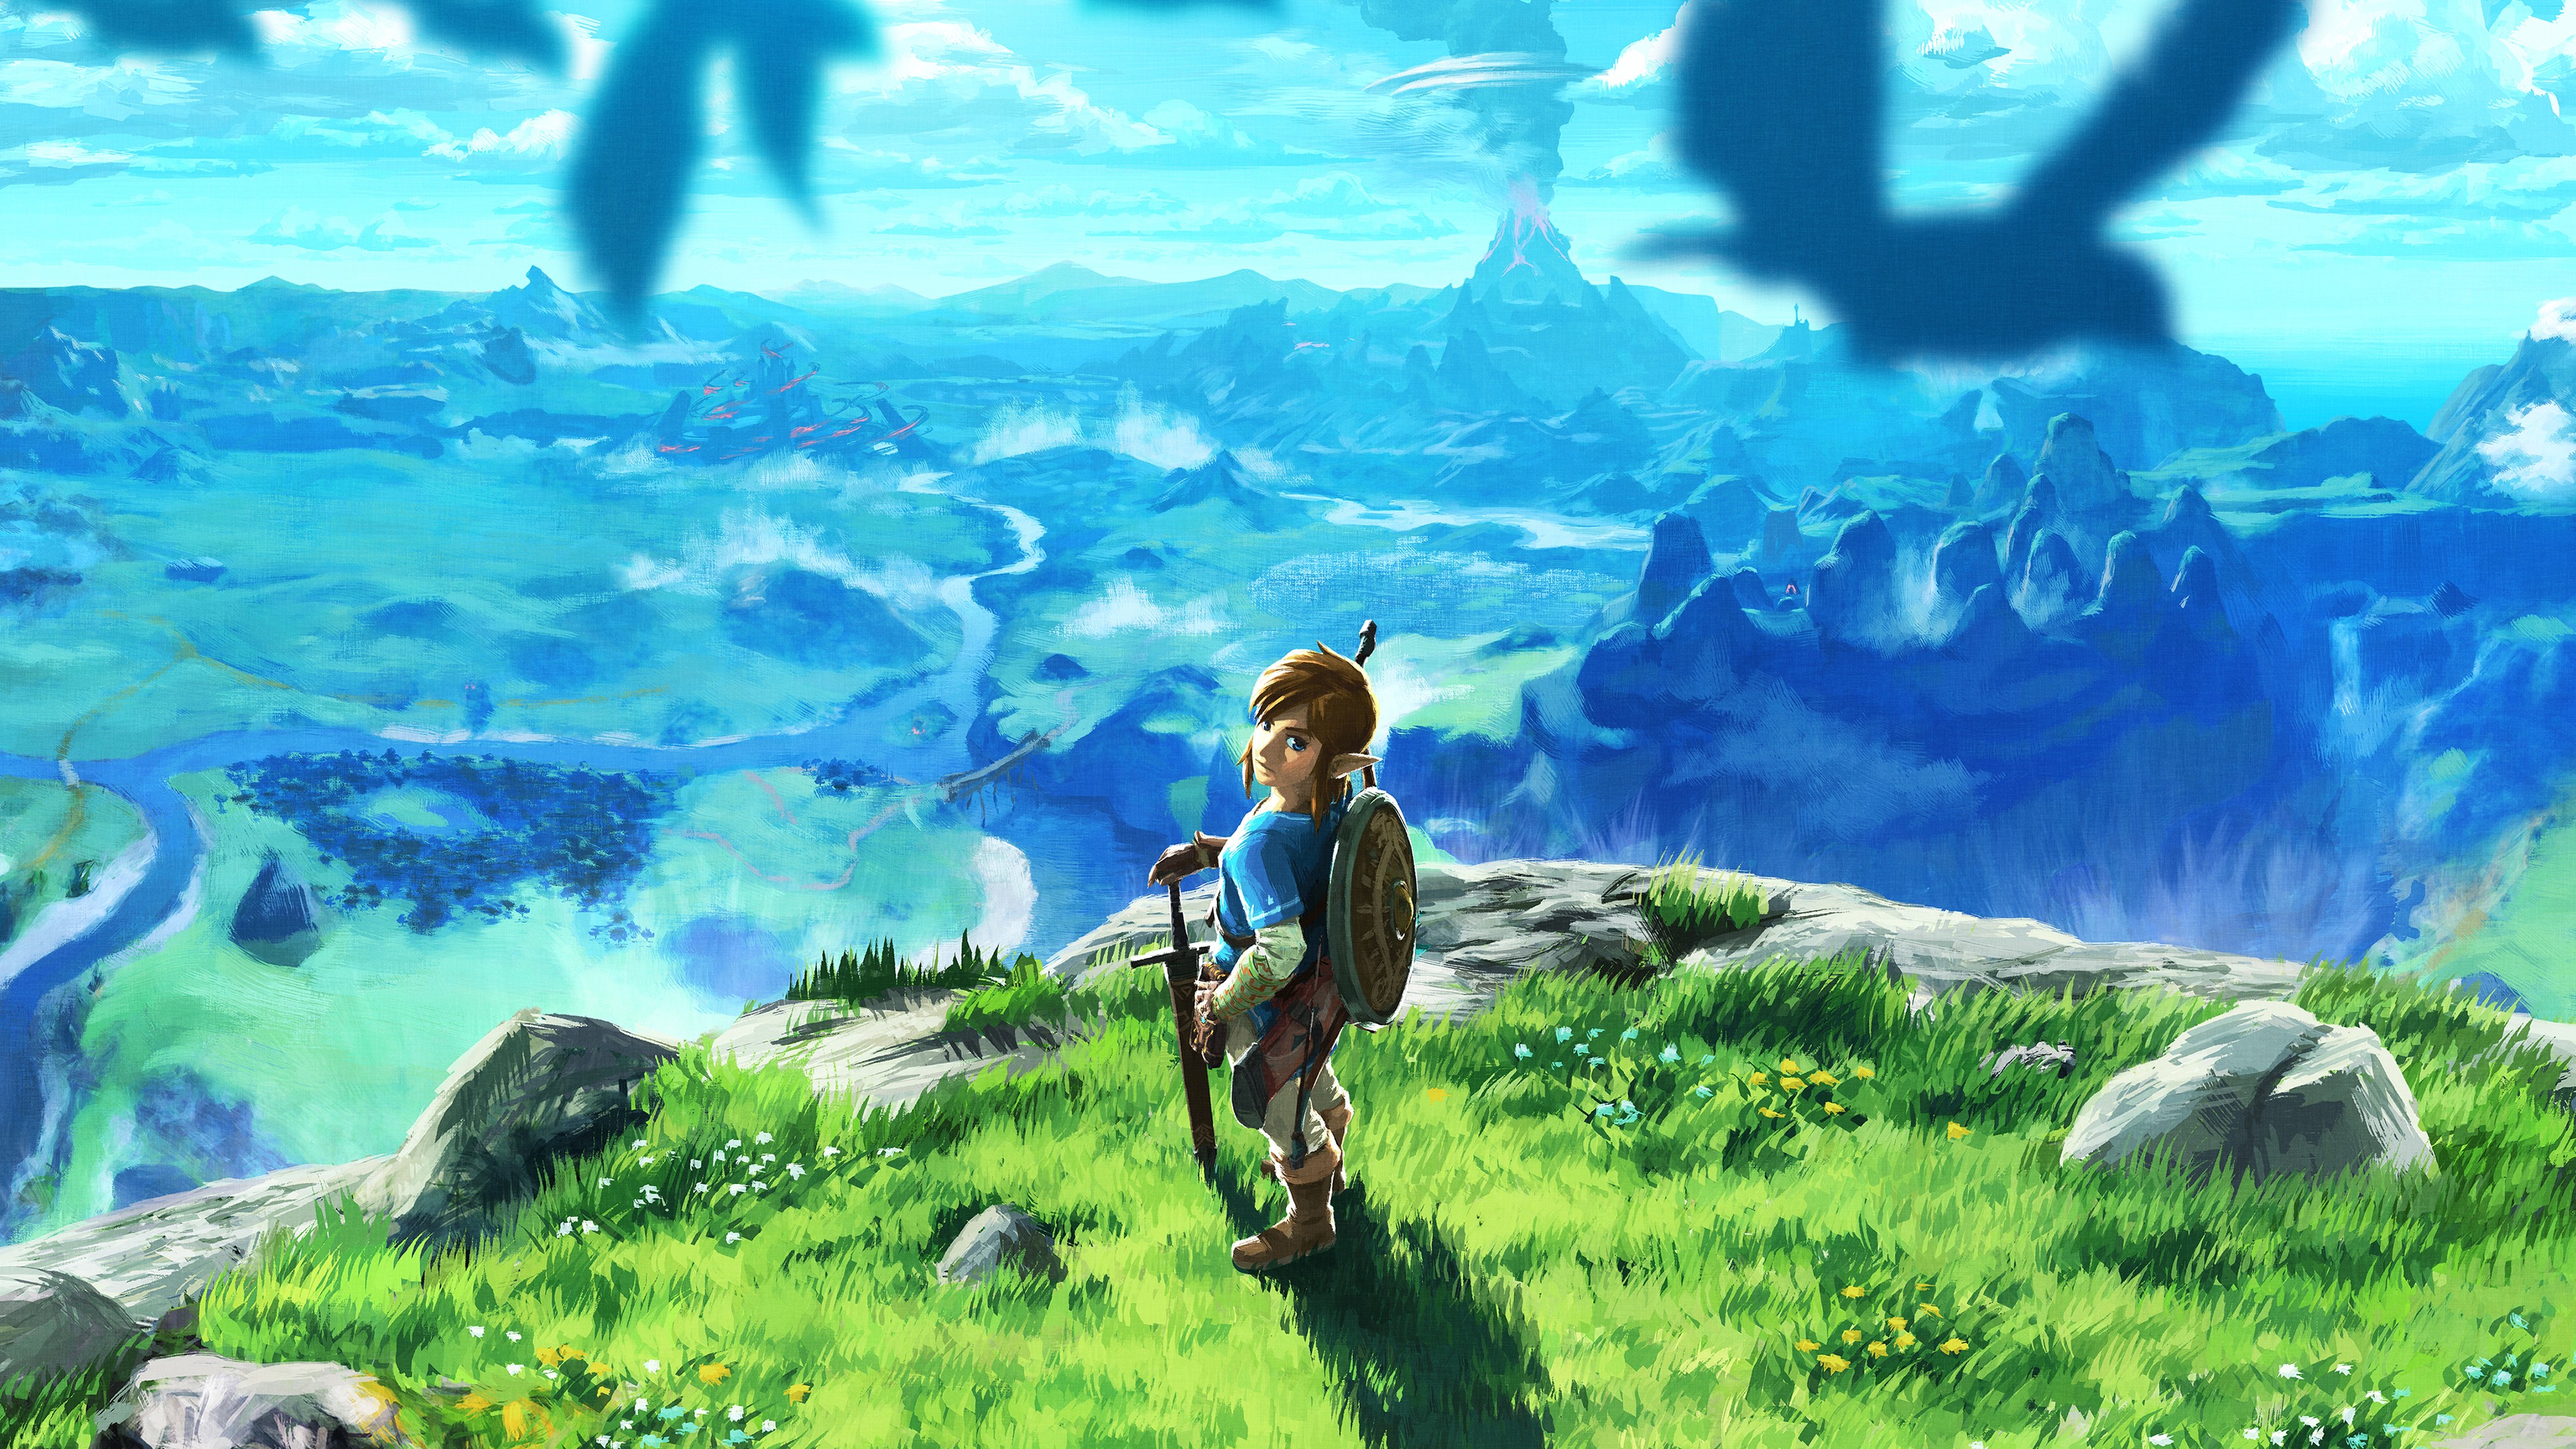 General 3840x2160 The Legend of Zelda: Breath of the Wild Zelda Link The Legend of Zelda video games cyan video game characters Nintendo